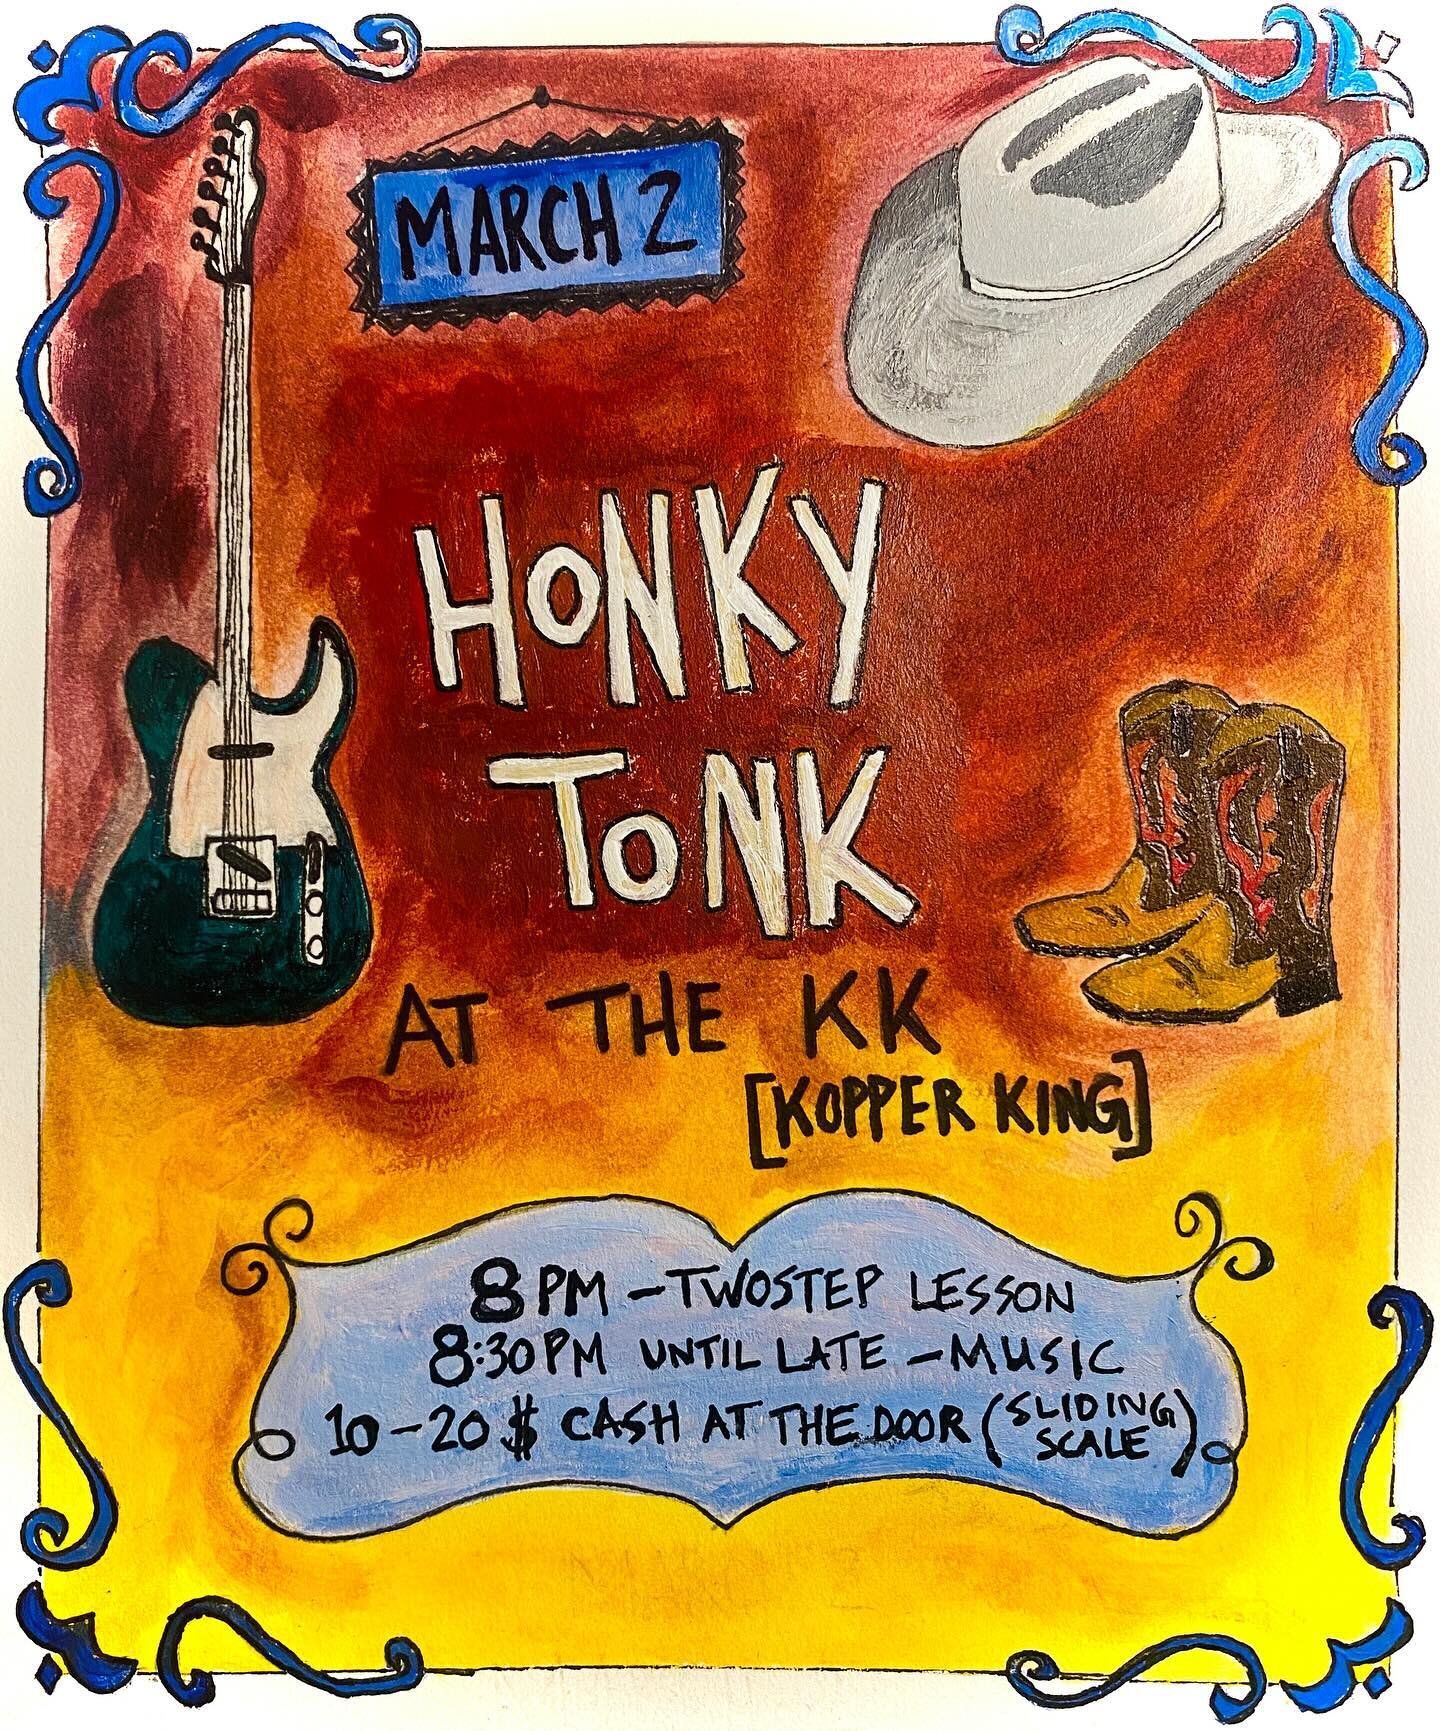 What&rsquo;s up Whitehorse we&rsquo;re having a honky tonk! 

Dancing and tunes at the Kopper King on March 2
8 pm : Twostep lesson
8:30 pm until late: Live music
10-20$ cash at the door (sliding scale)

@ryan_mcnally_music @sarahfrigginhamilton  @je